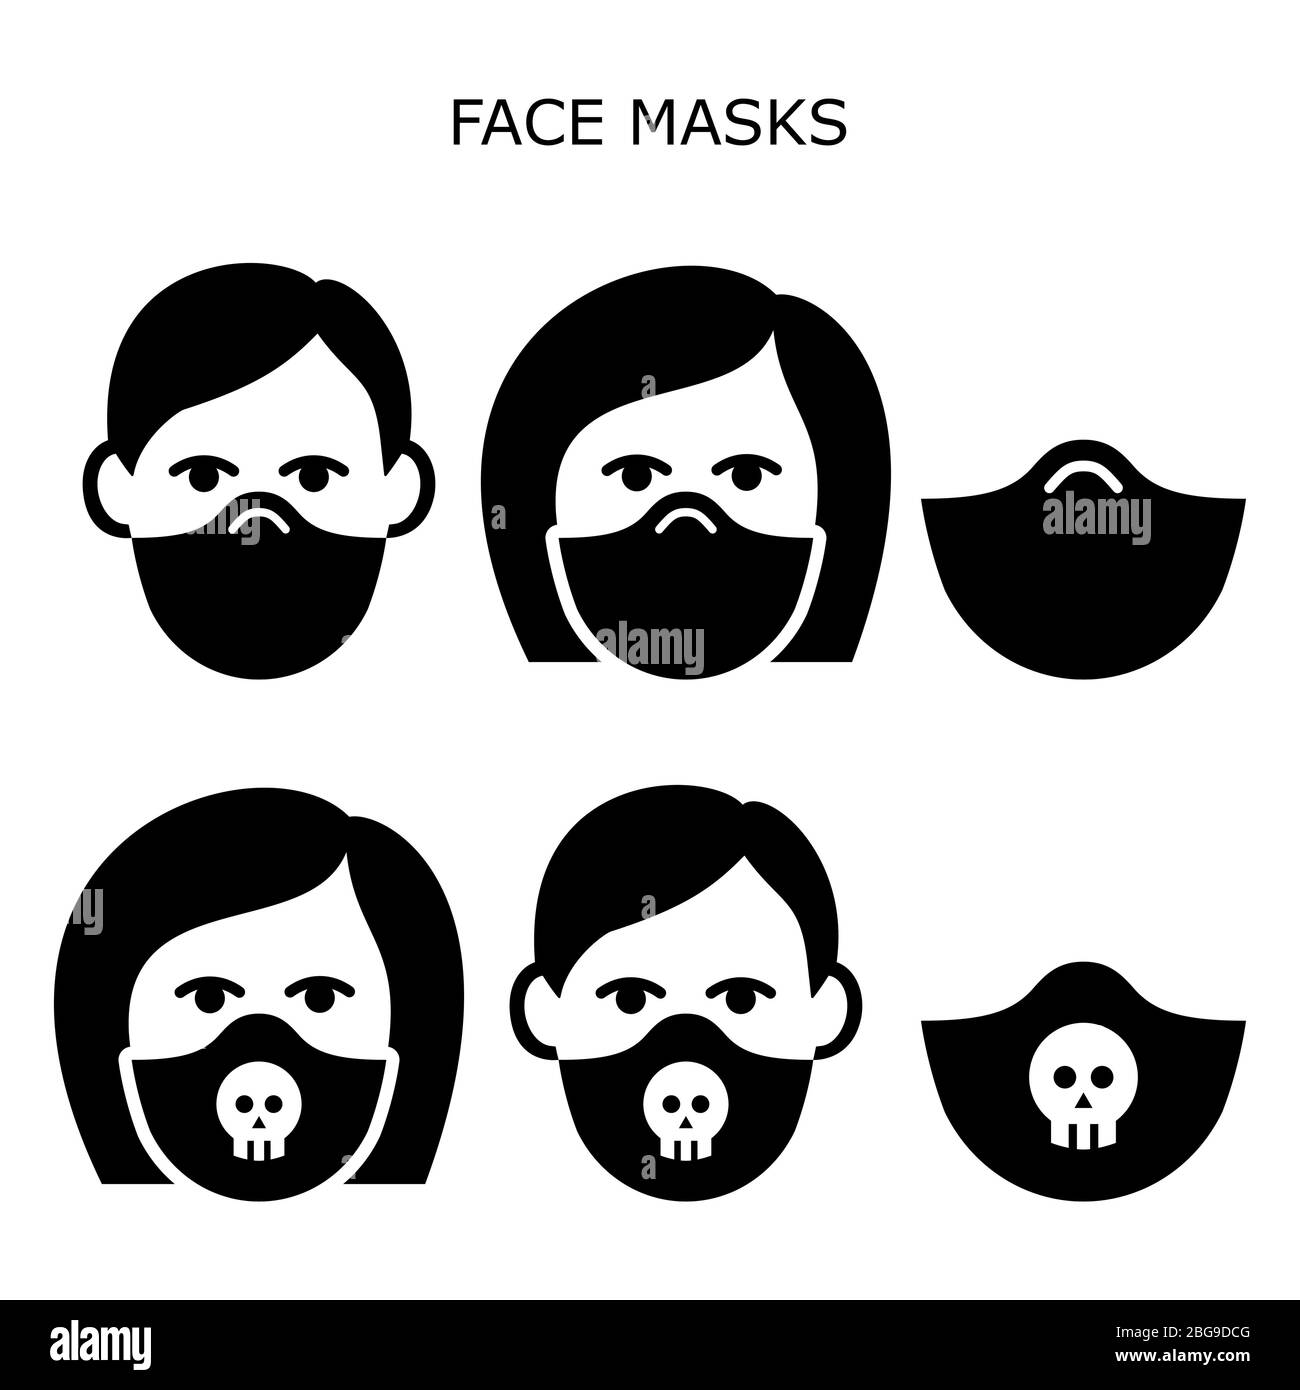 Man and woman wearing safety face masks vector icons set - masks worn during self-distancing to prevent disease, virus, air pollution Stock Vector